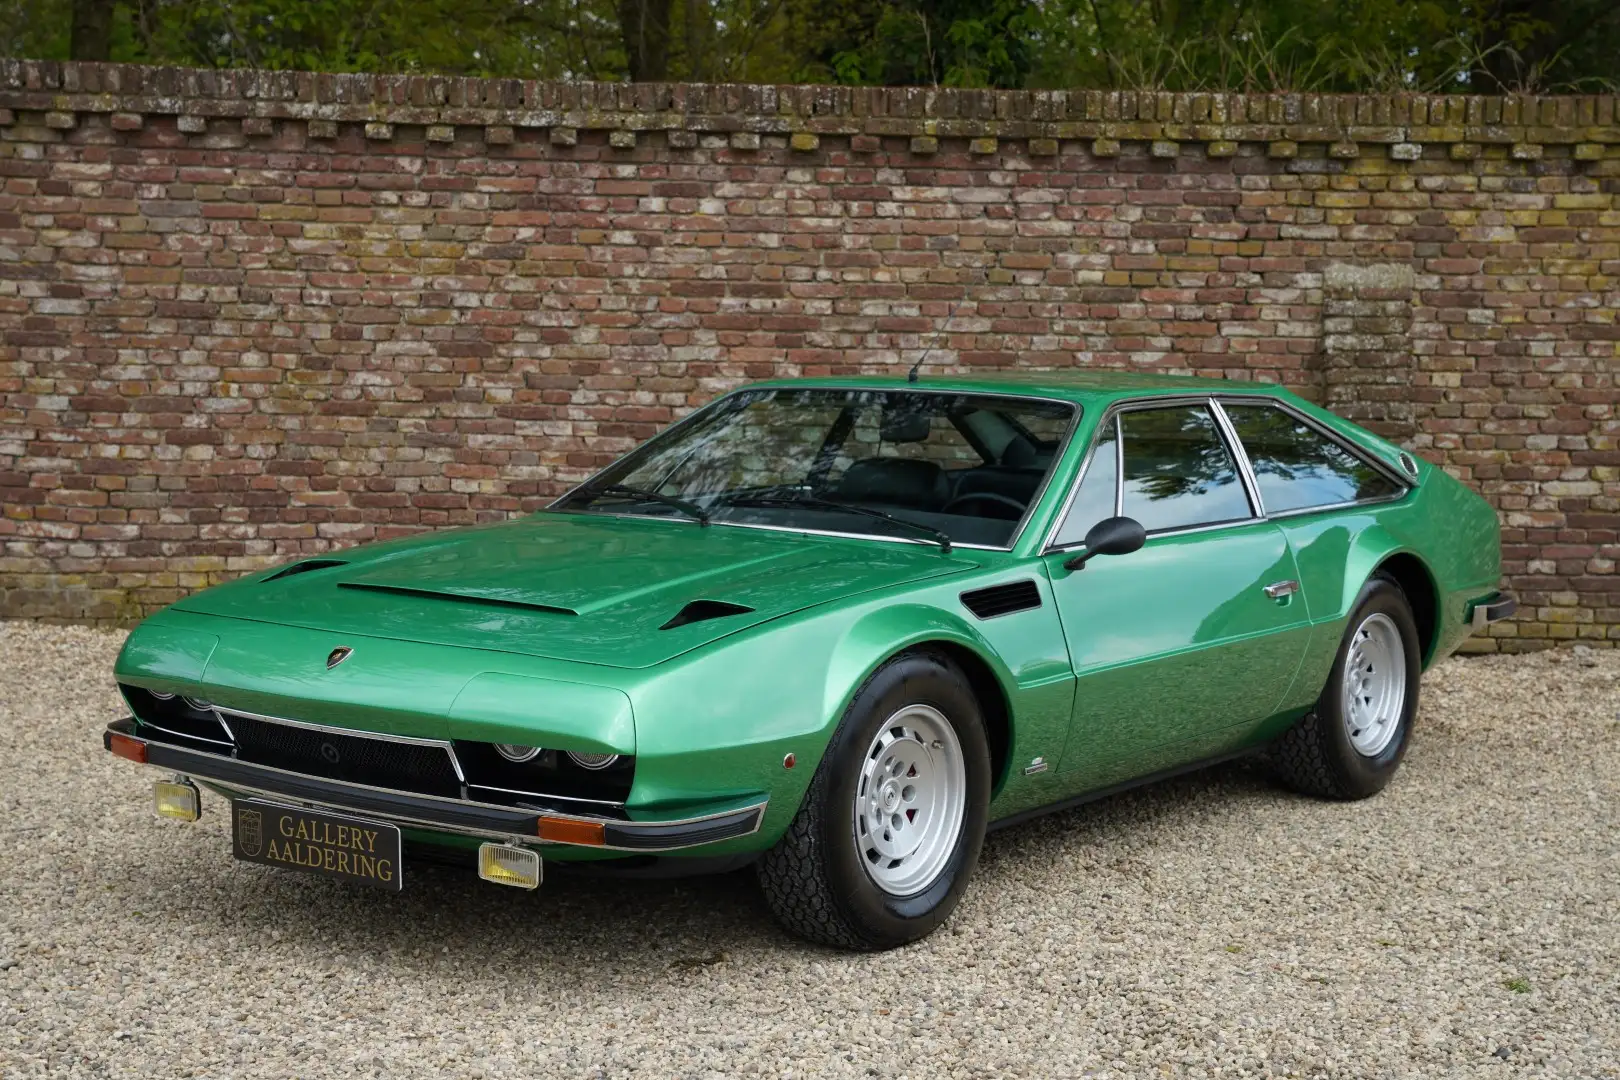 Lamborghini Jarama S Coupe One of only 150 (GT)S models, Prese Vert - 1